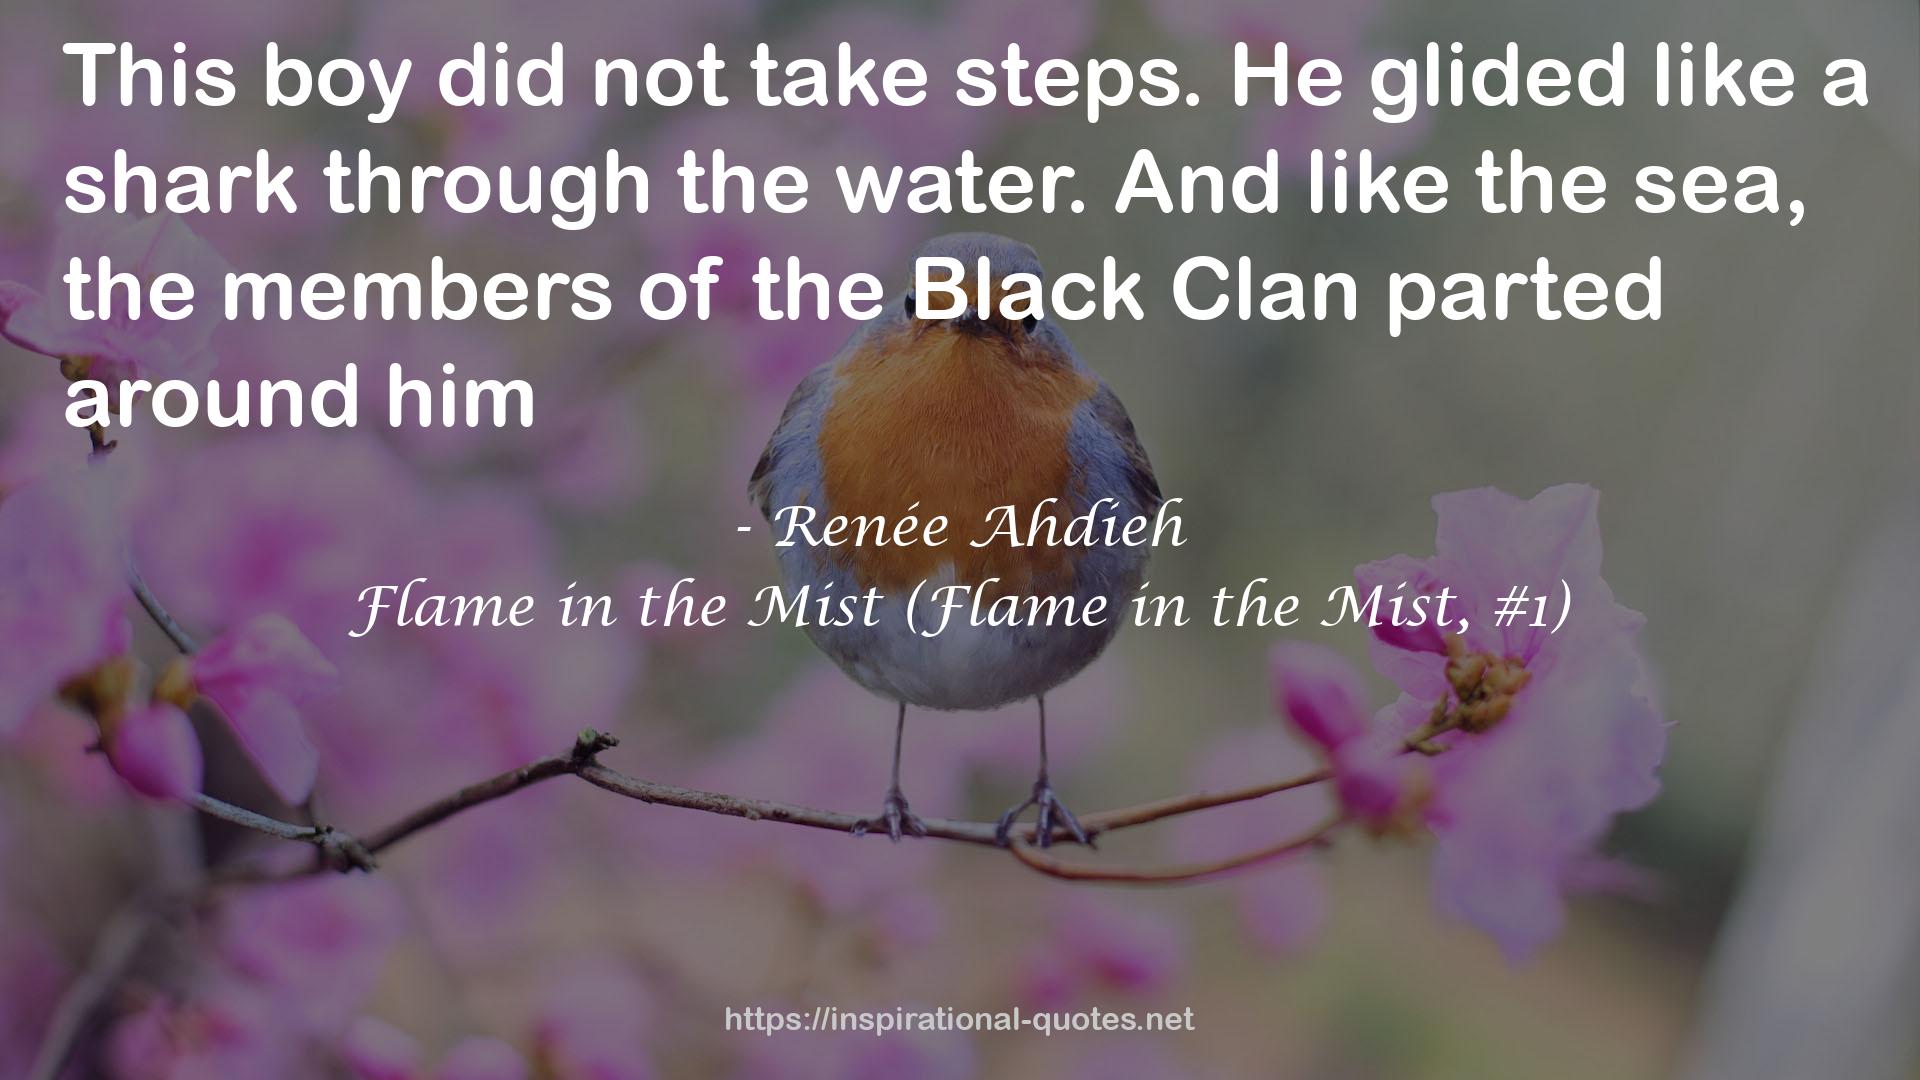 Flame in the Mist (Flame in the Mist, #1) QUOTES